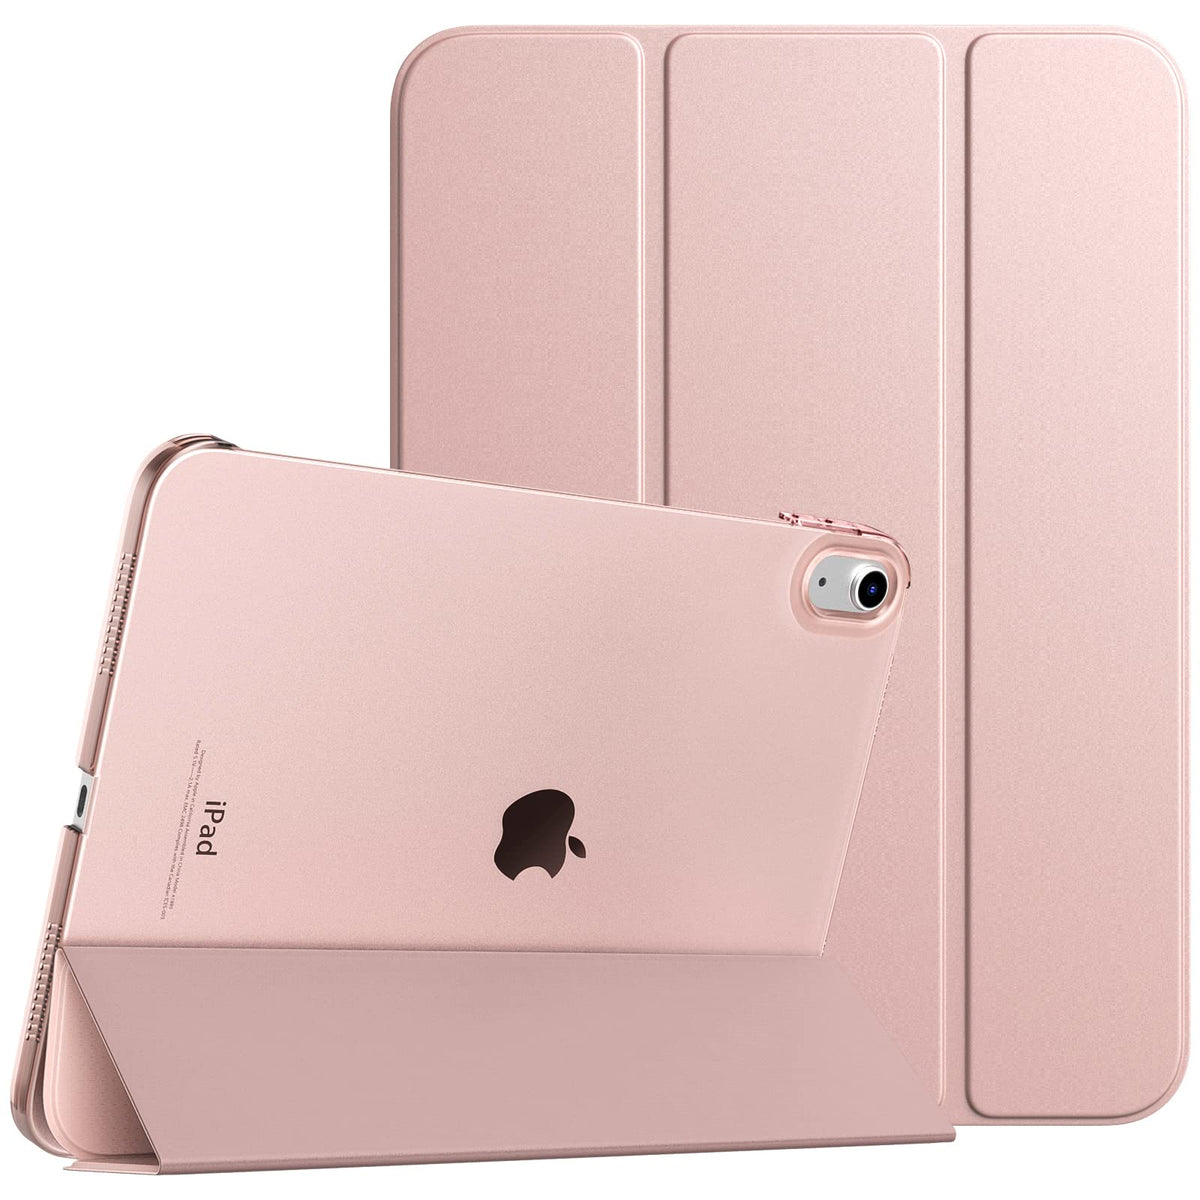 TiMOVO Case for iPad 10th Generation Case 2022, Slim Stand Cover for iPad 10th Gen 10.9 inch, Support Touch ID, Auto Wake/Sleep Smart Shell with Translucent Back, Fit iPad 10 Case, Rose Gold